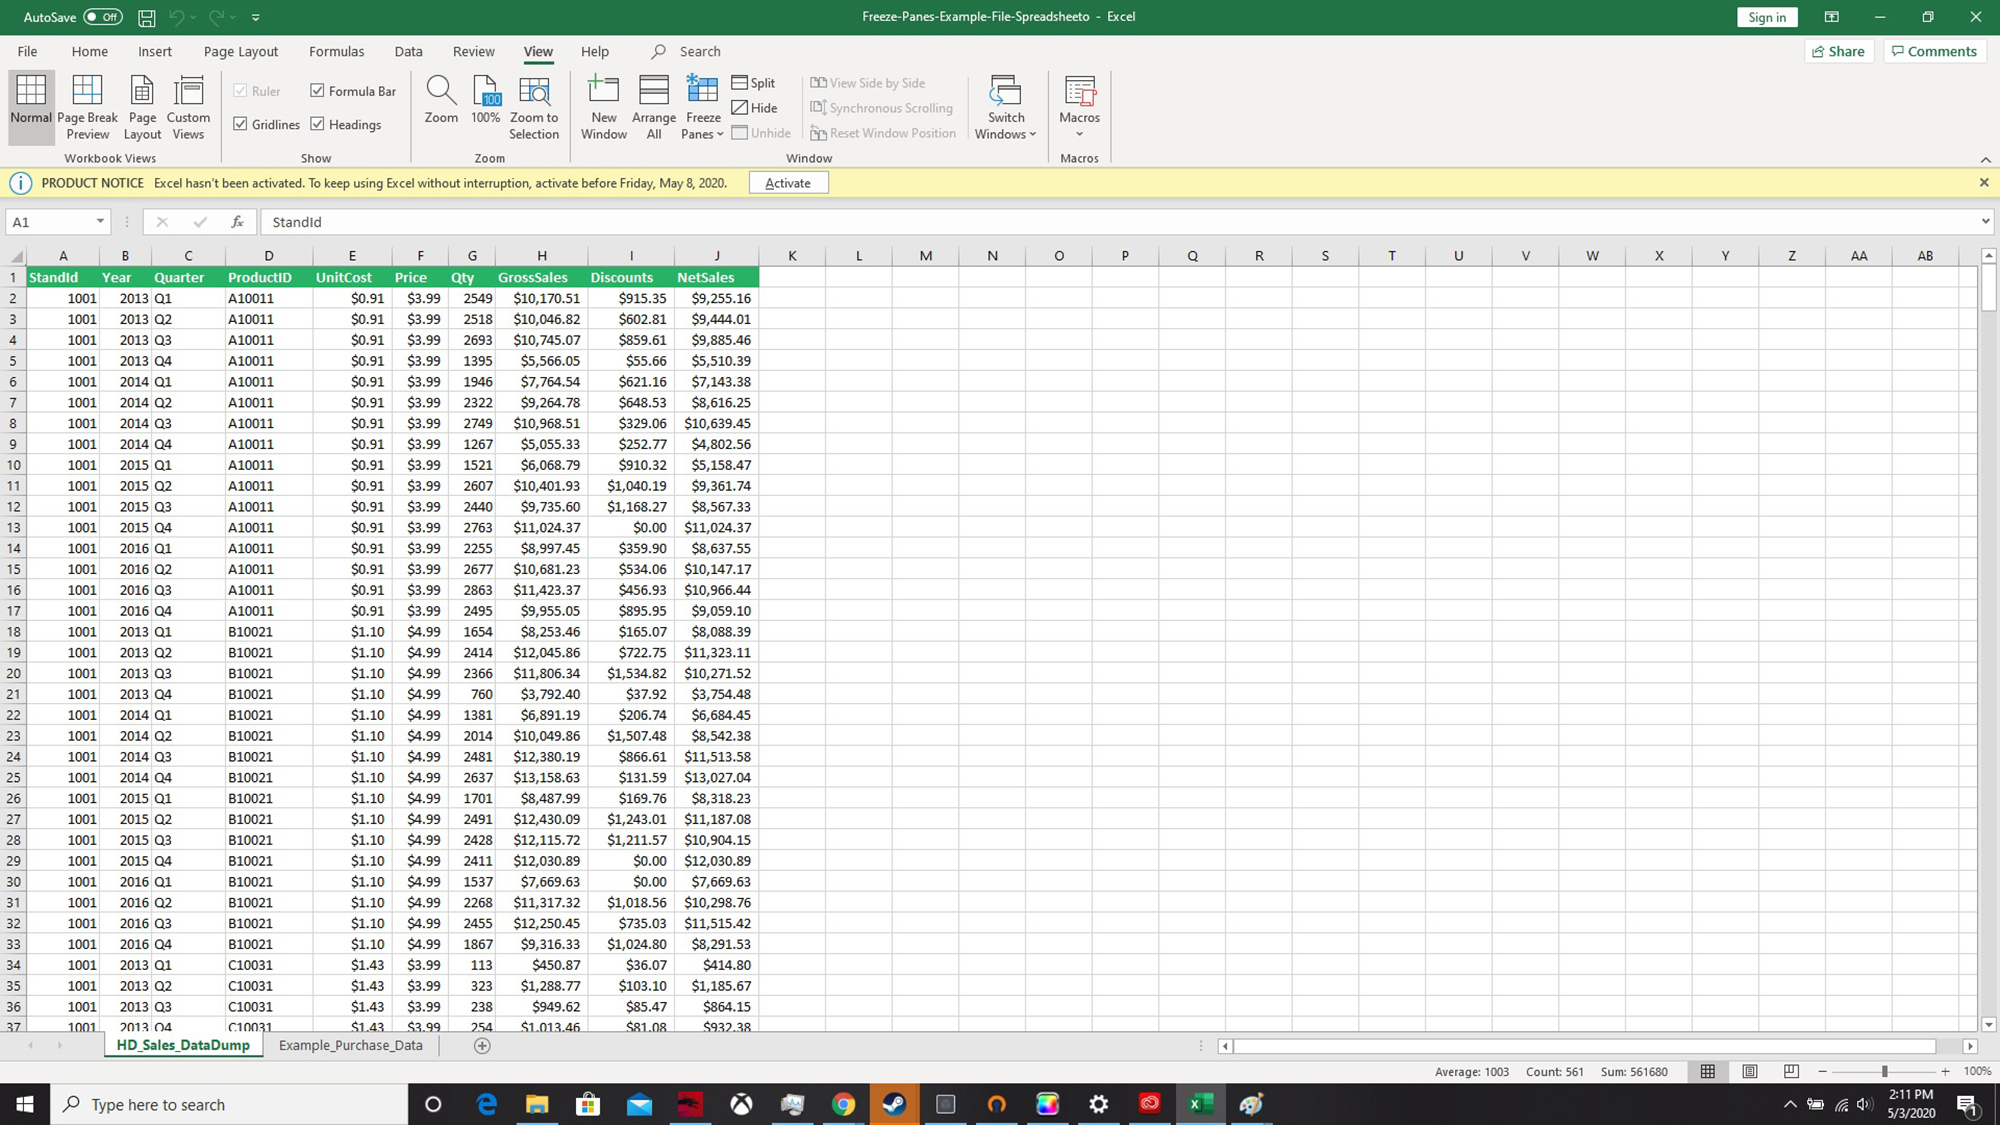 can you freeze multiple panes in excel 2010